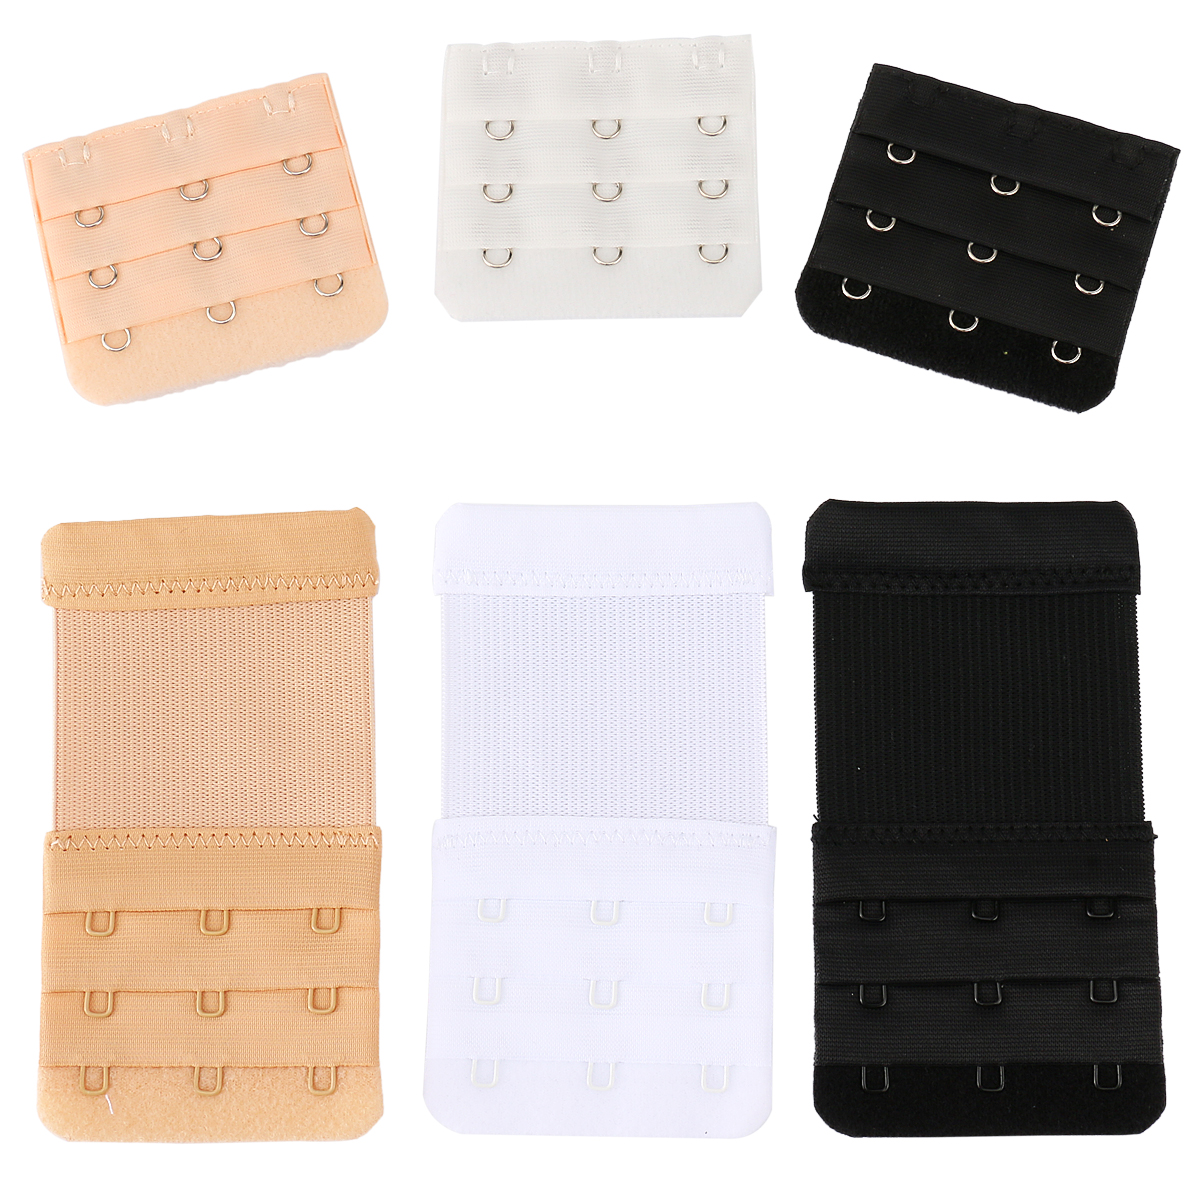 Bra extender is used to add more extra room to bras that are too tight and makes it comfort while wearing your bra.Save money by helping your bras last longer.